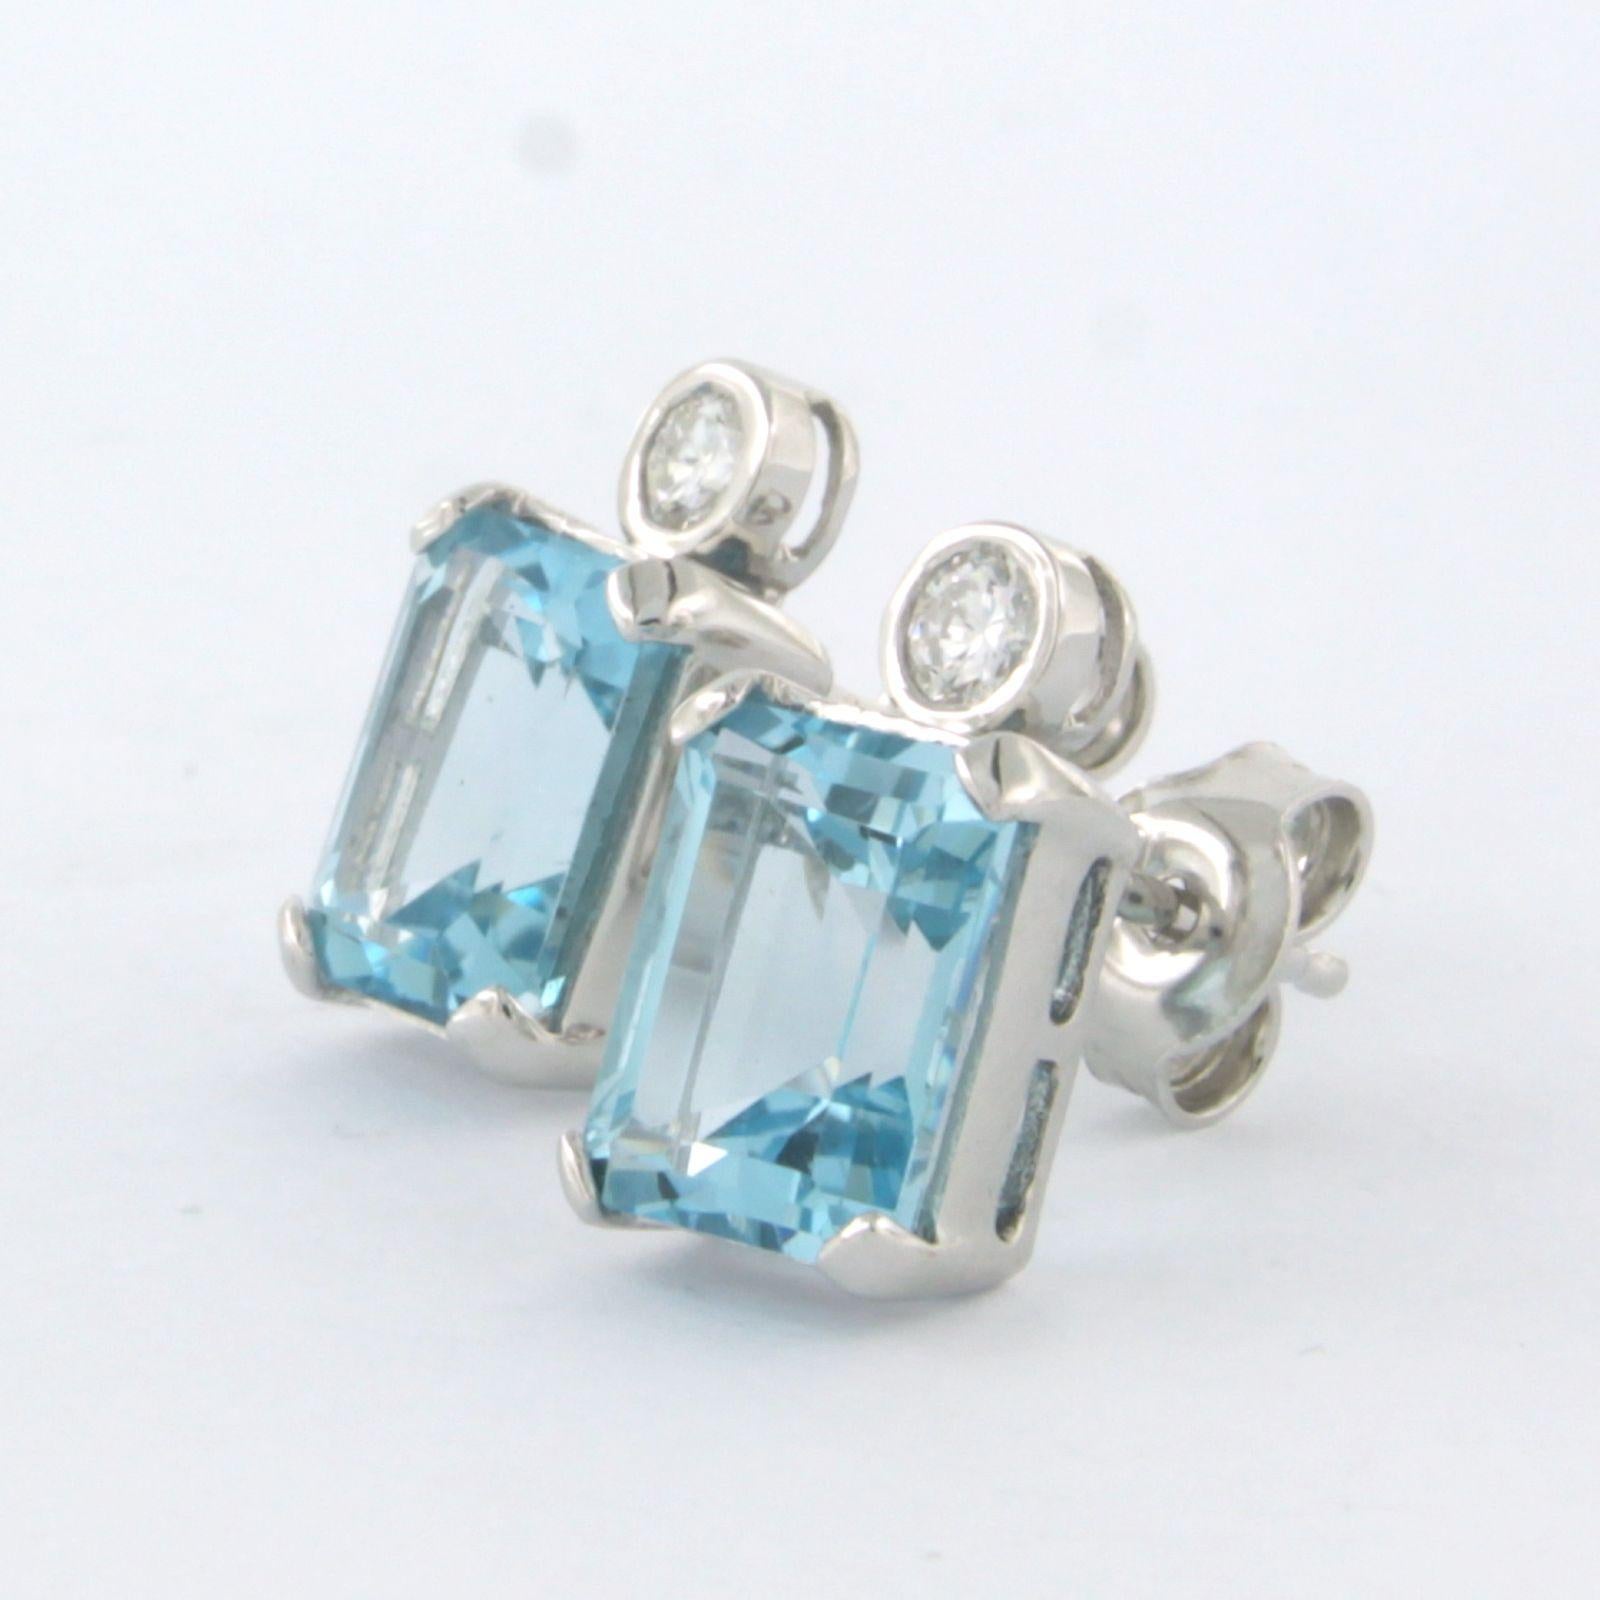 Women's Earrings set with topaz and diamonds 14k white gold